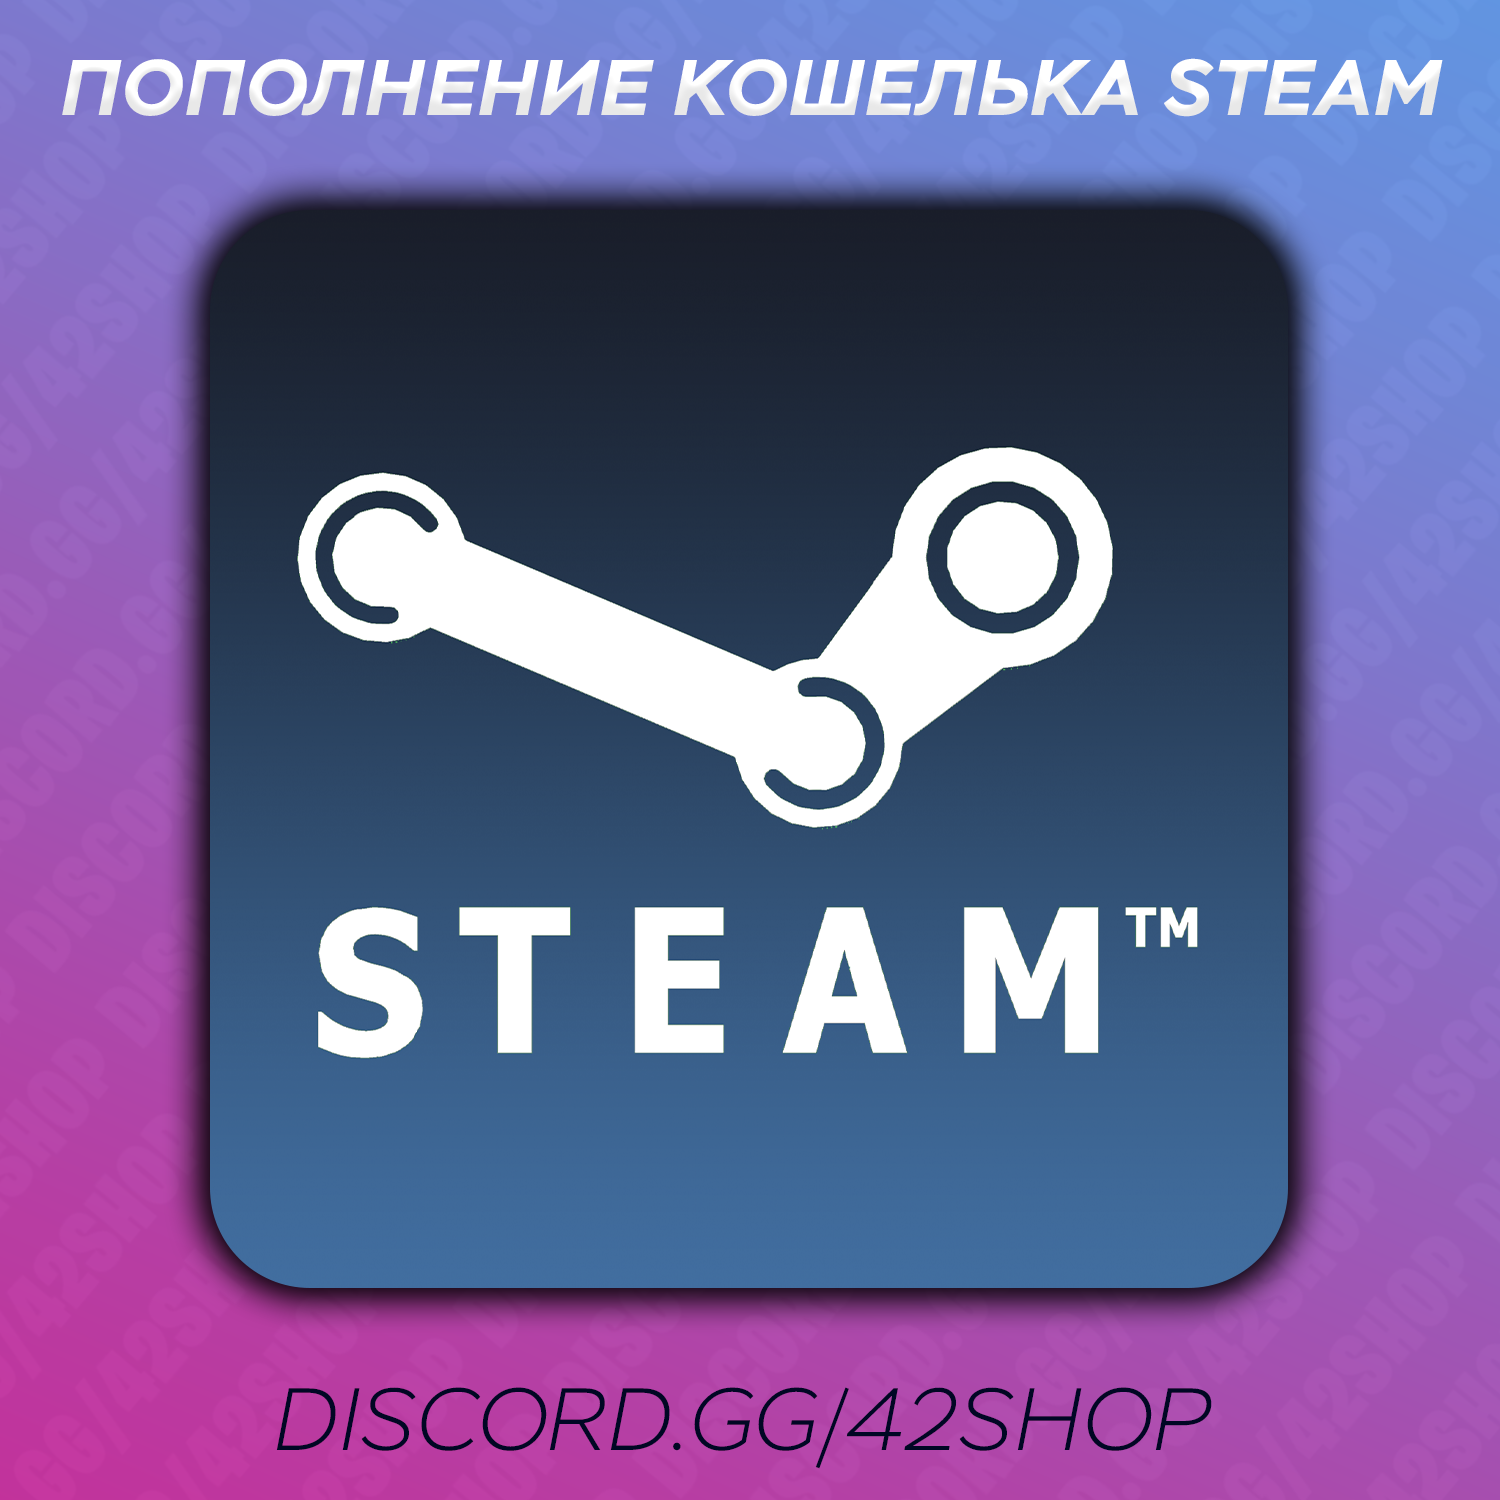 You must have steam purchase фото 24